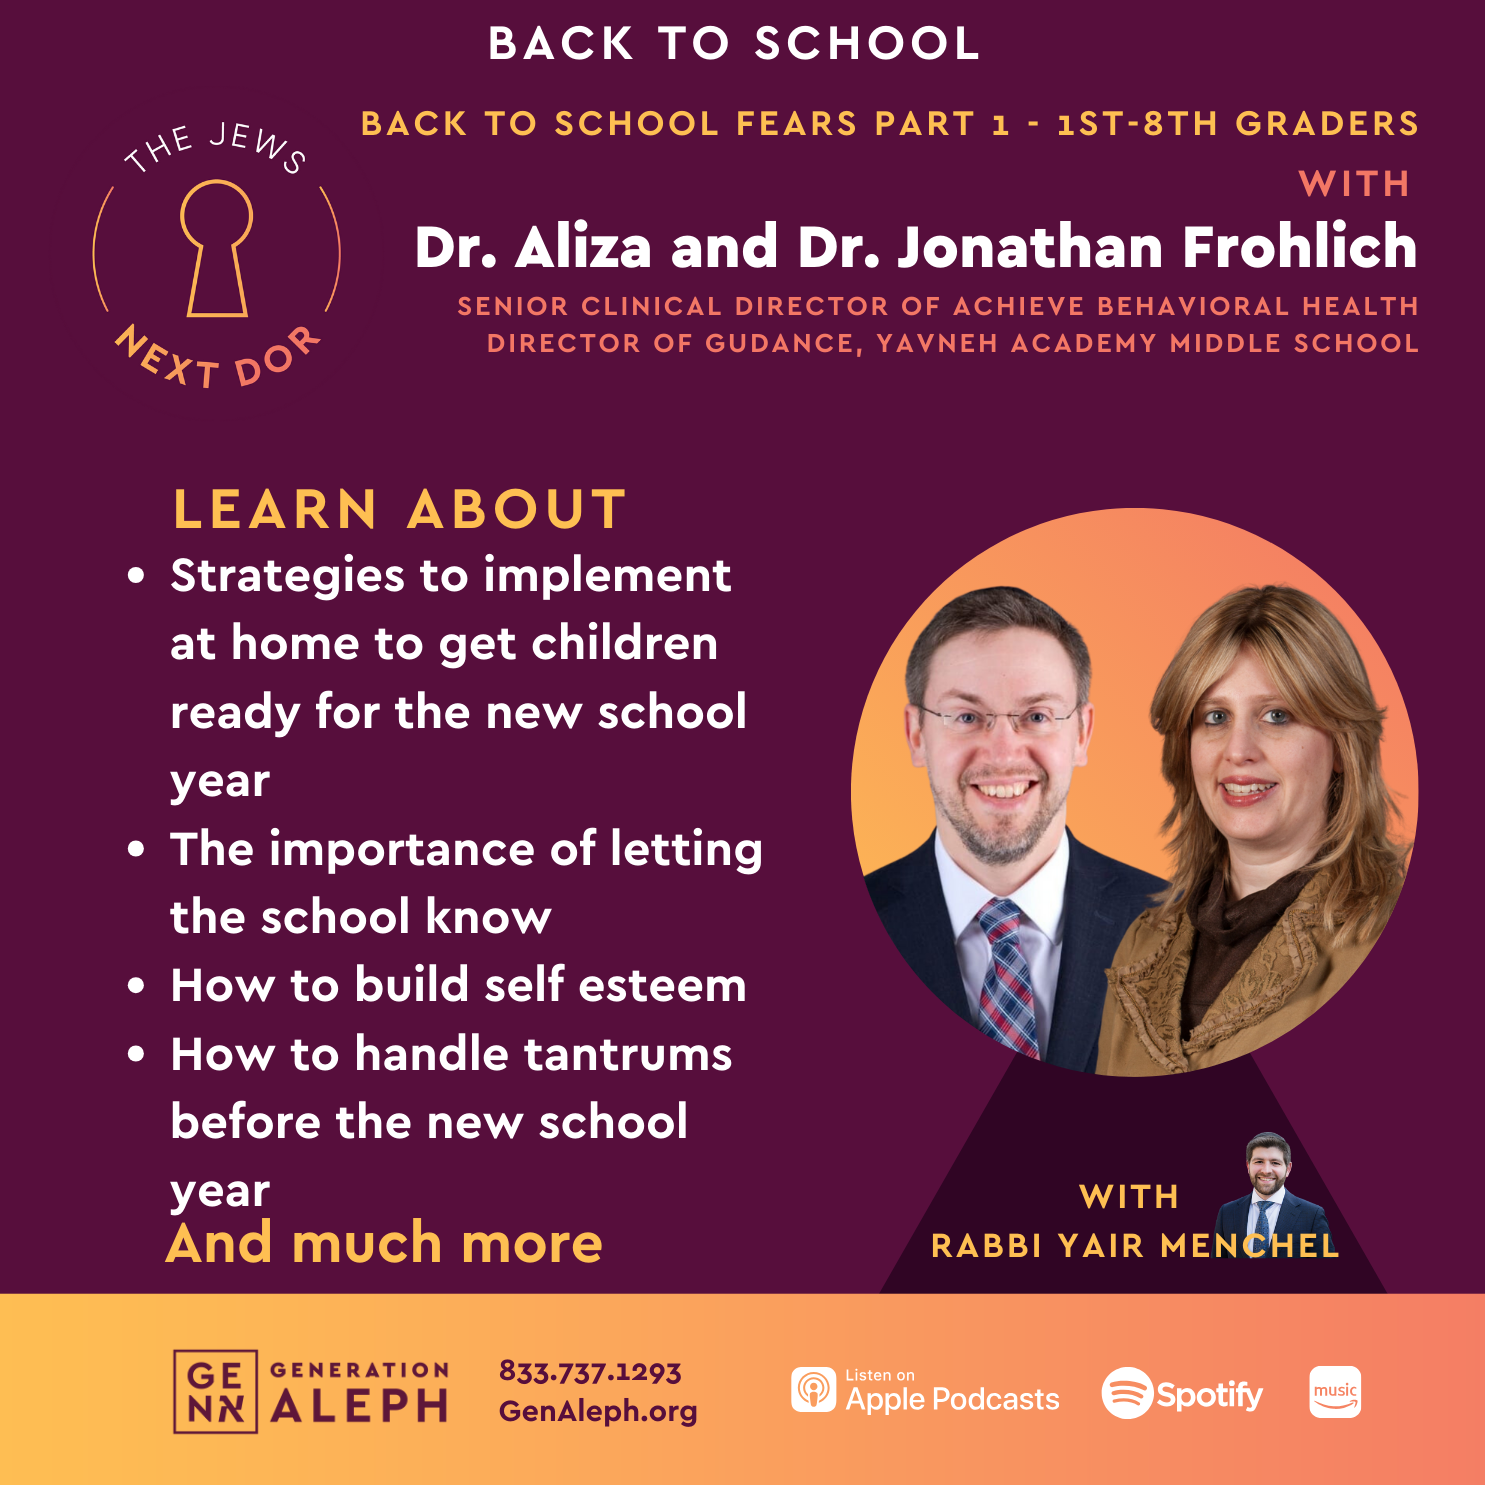 Conquering Back to School Jitters Part 1: A Guide for Parents of 1st-8th Graders – Dr. Aliza and Dr. Jonathan Frohlich